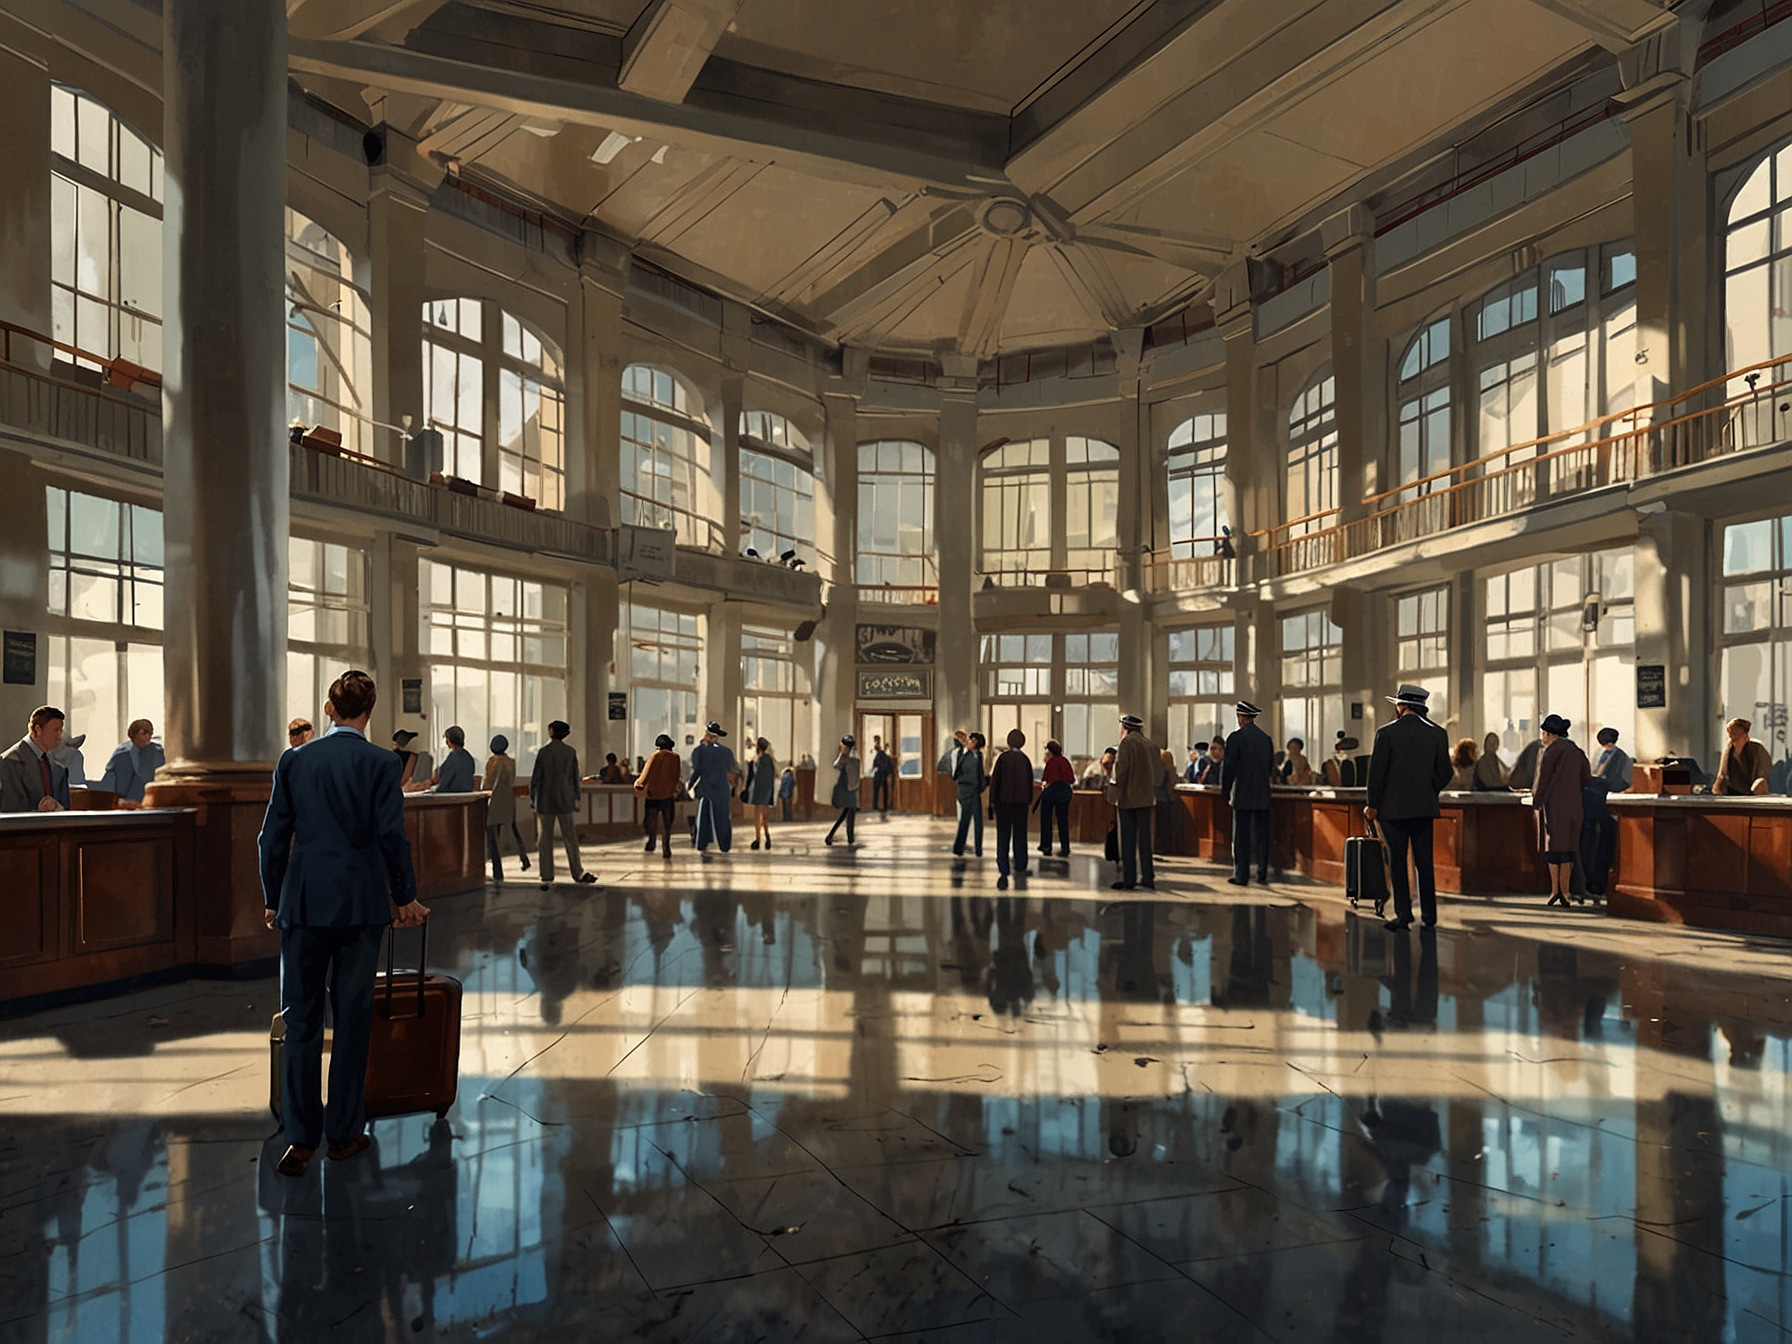 A guided tour group exploring the well-preserved Art Deco architecture of Croydon Airport's main terminal building, offering a glimpse into early 20th-century air travel opulence.